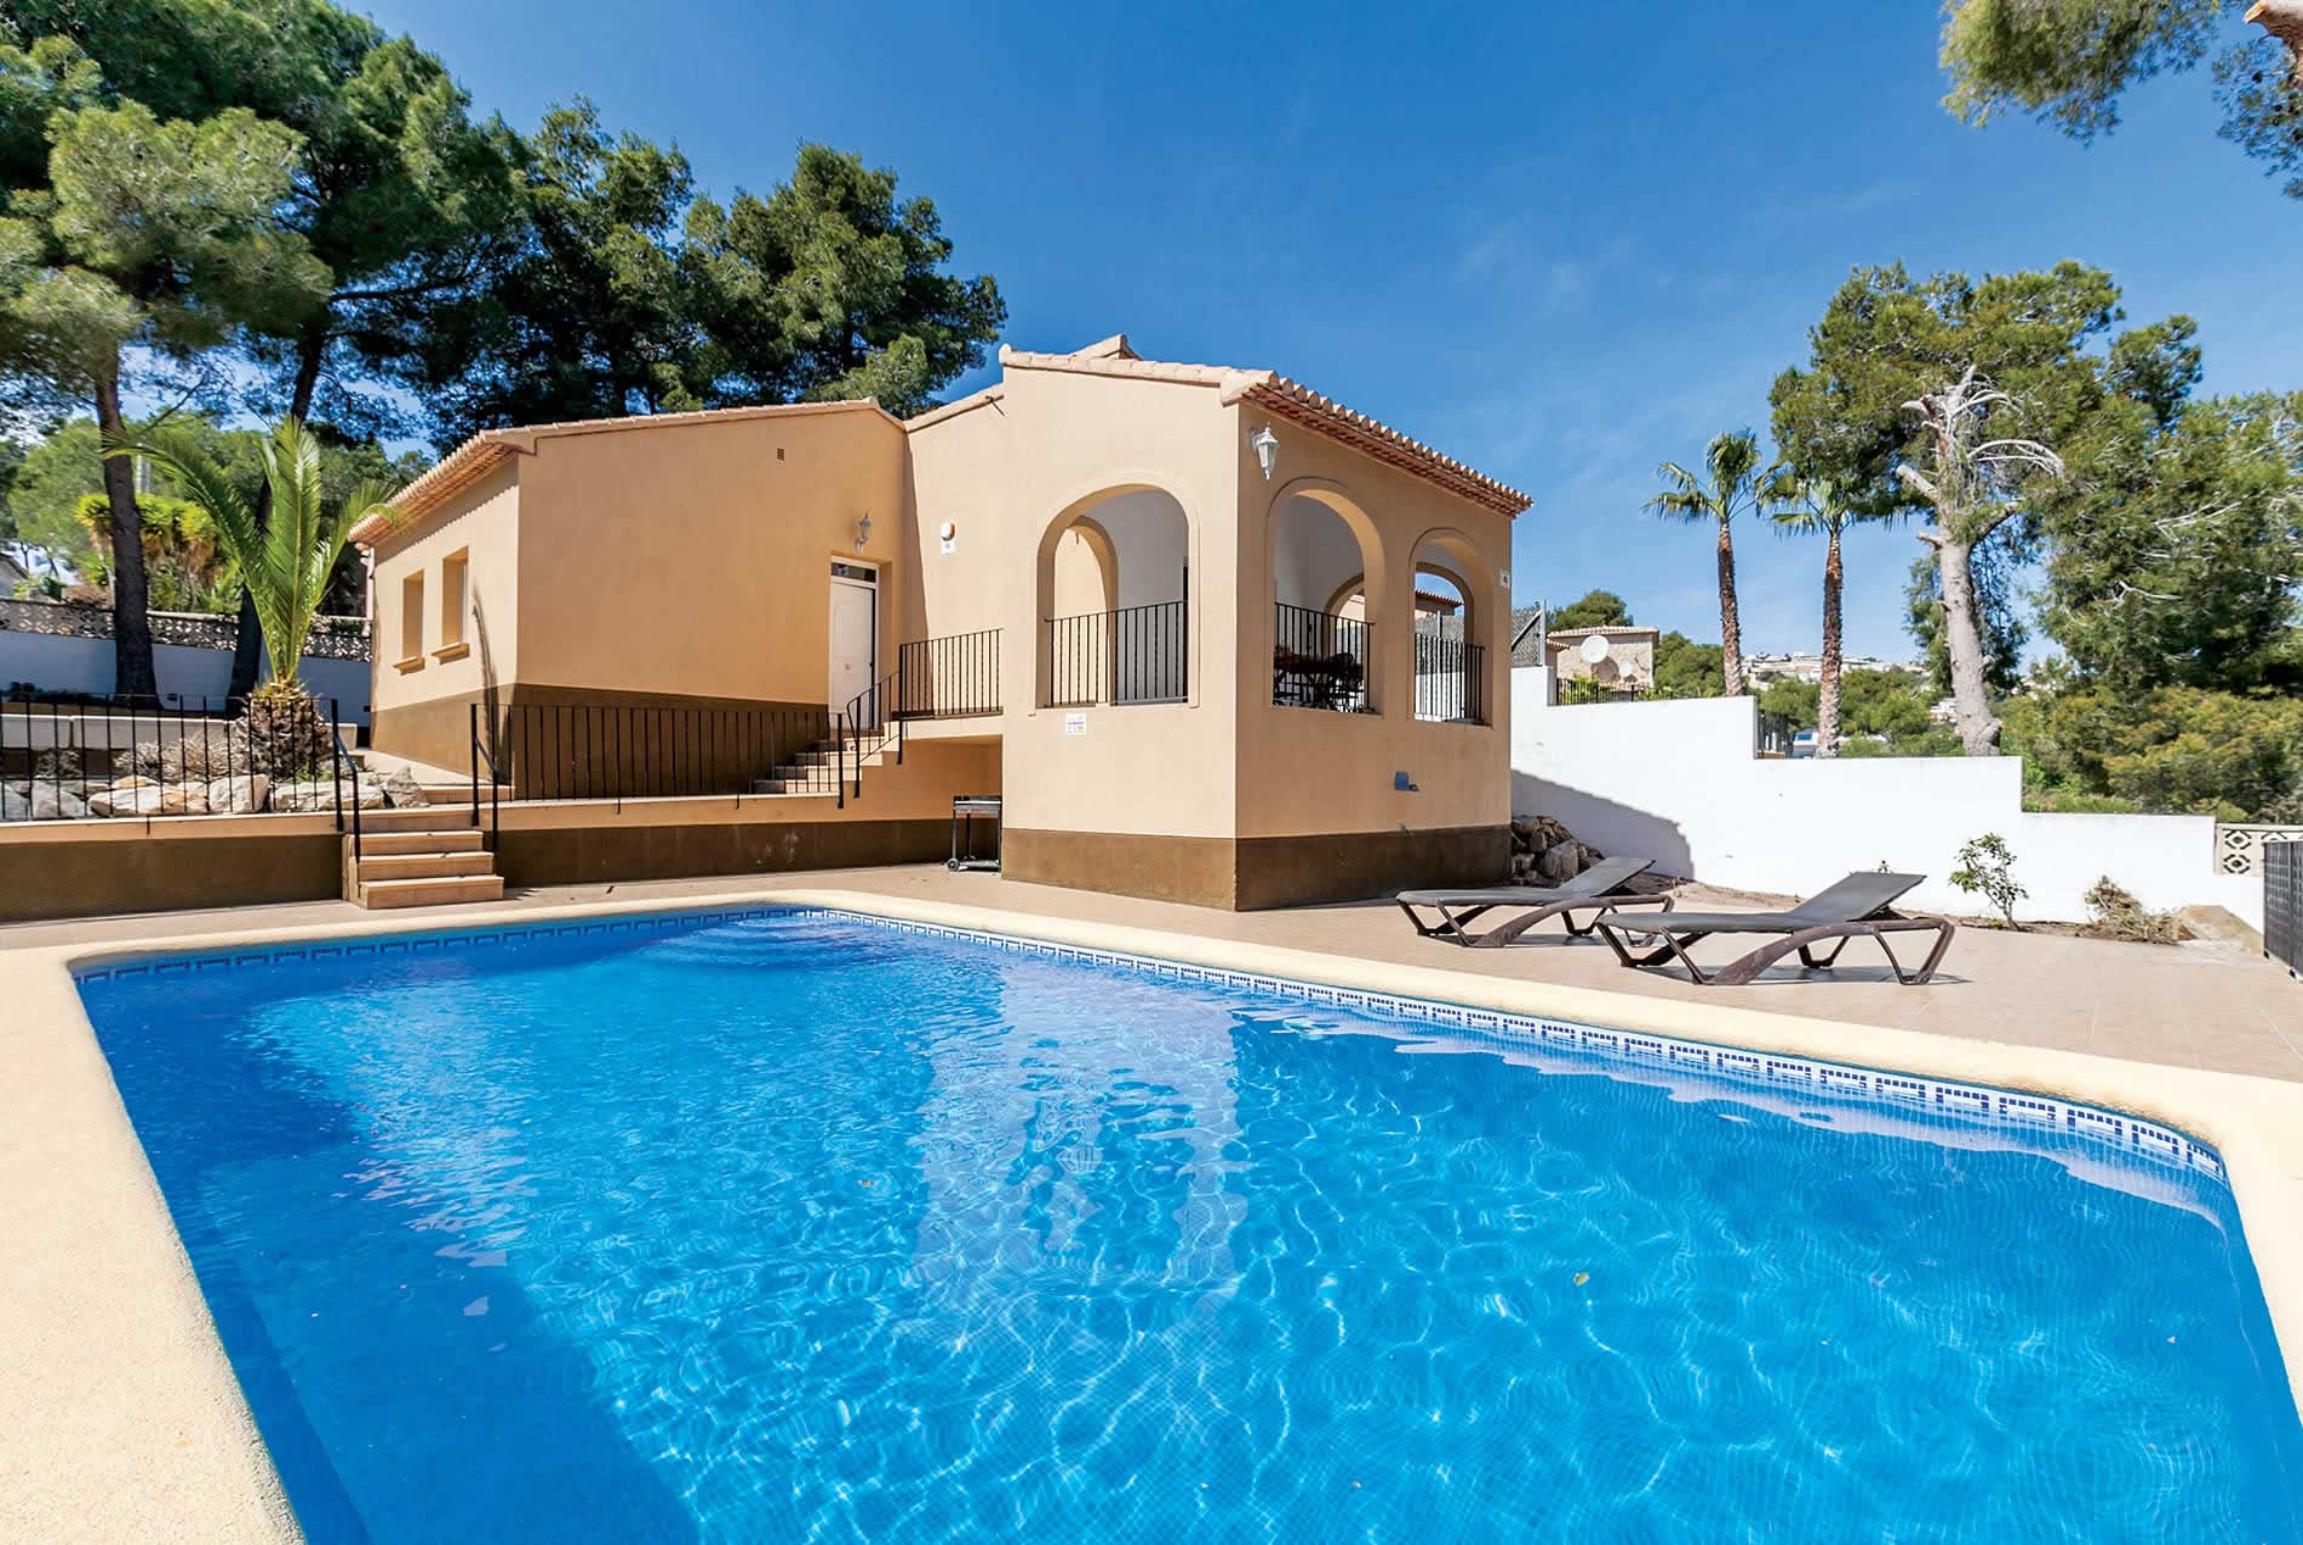 Property Image 1 - 3 bed villa, walking distance to amenities & beach